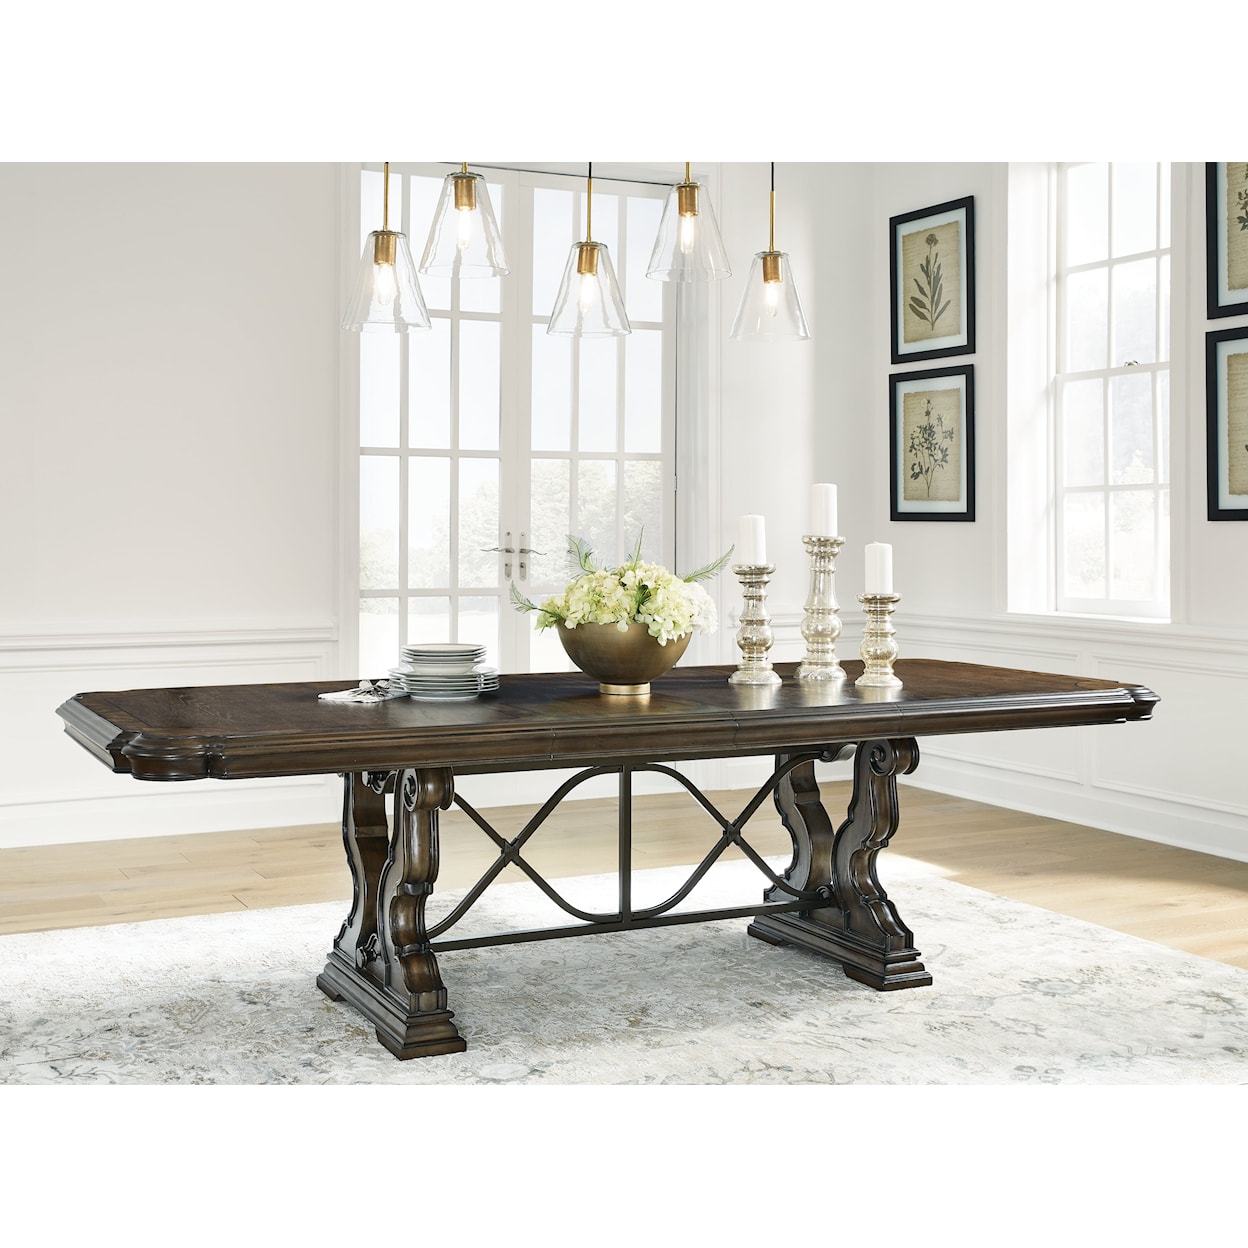 Benchcraft Maylee Dining Extension Table